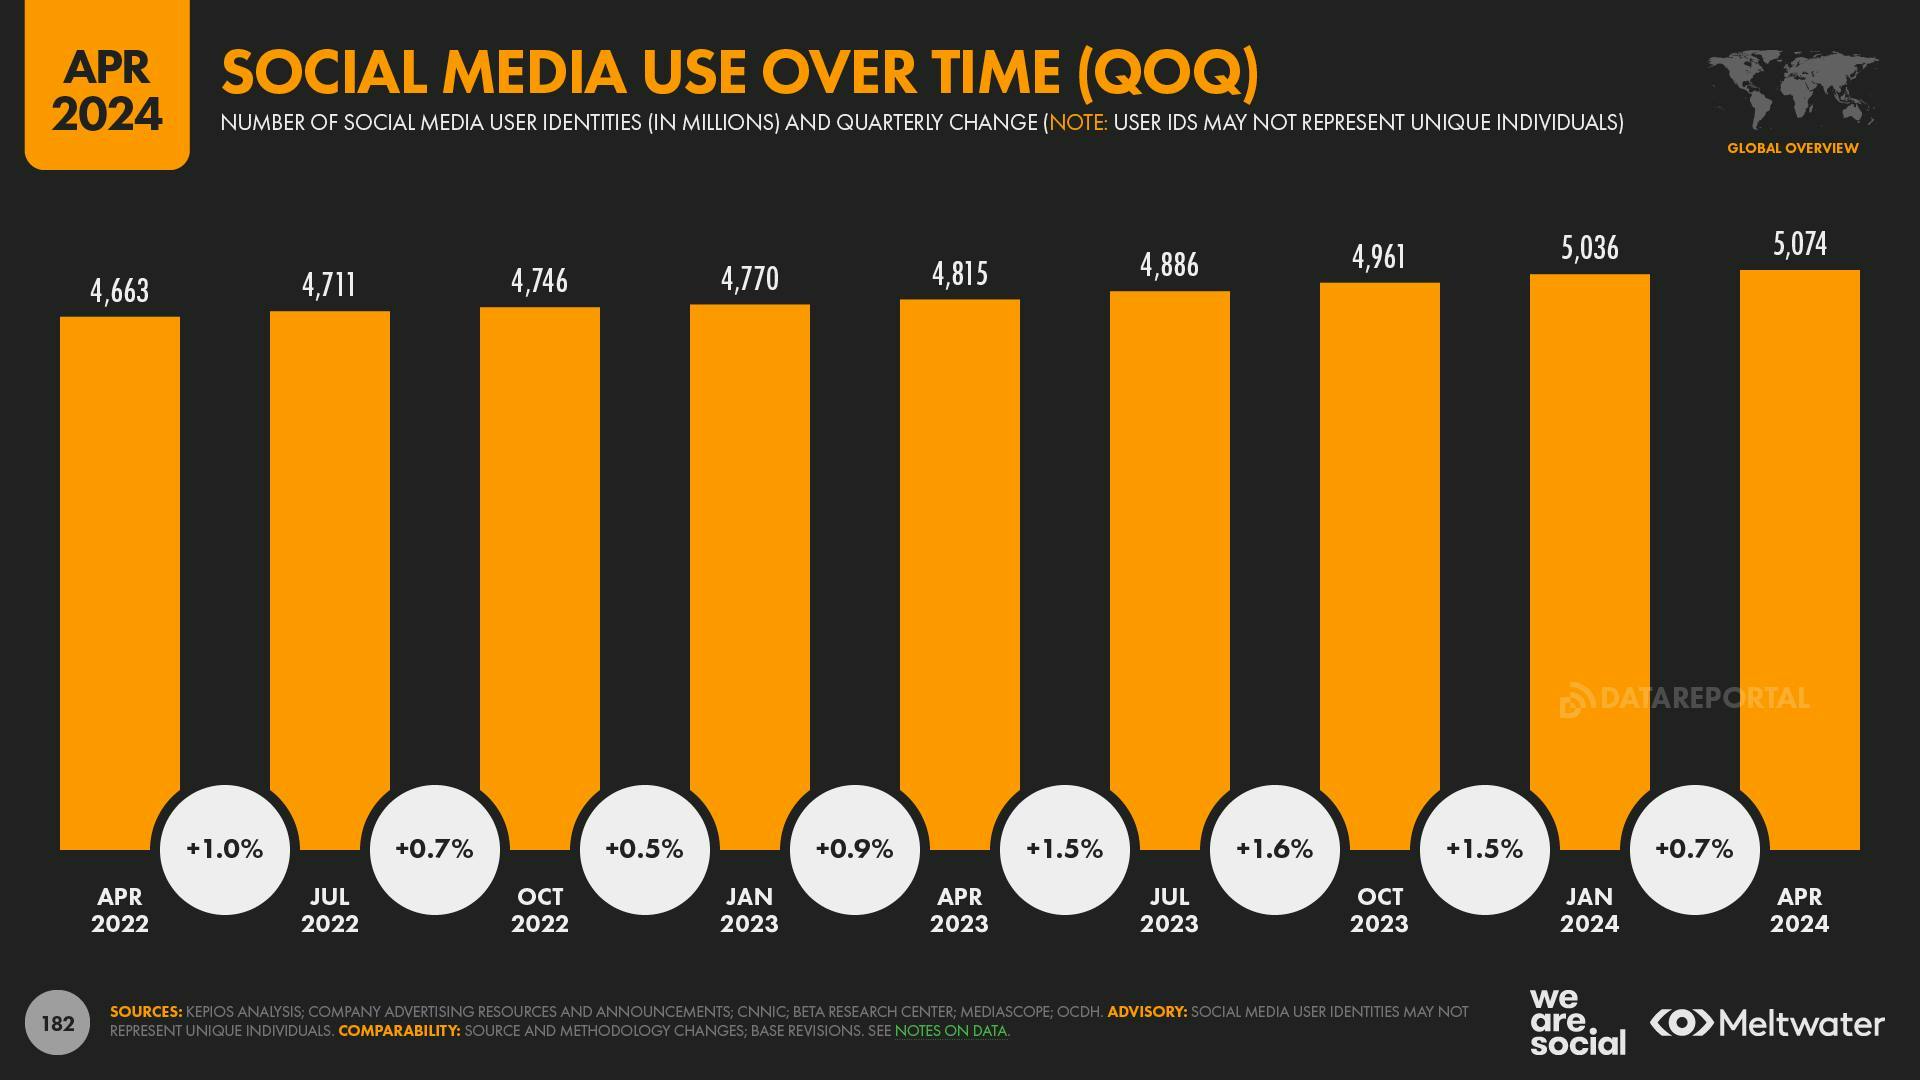 Social media use over time